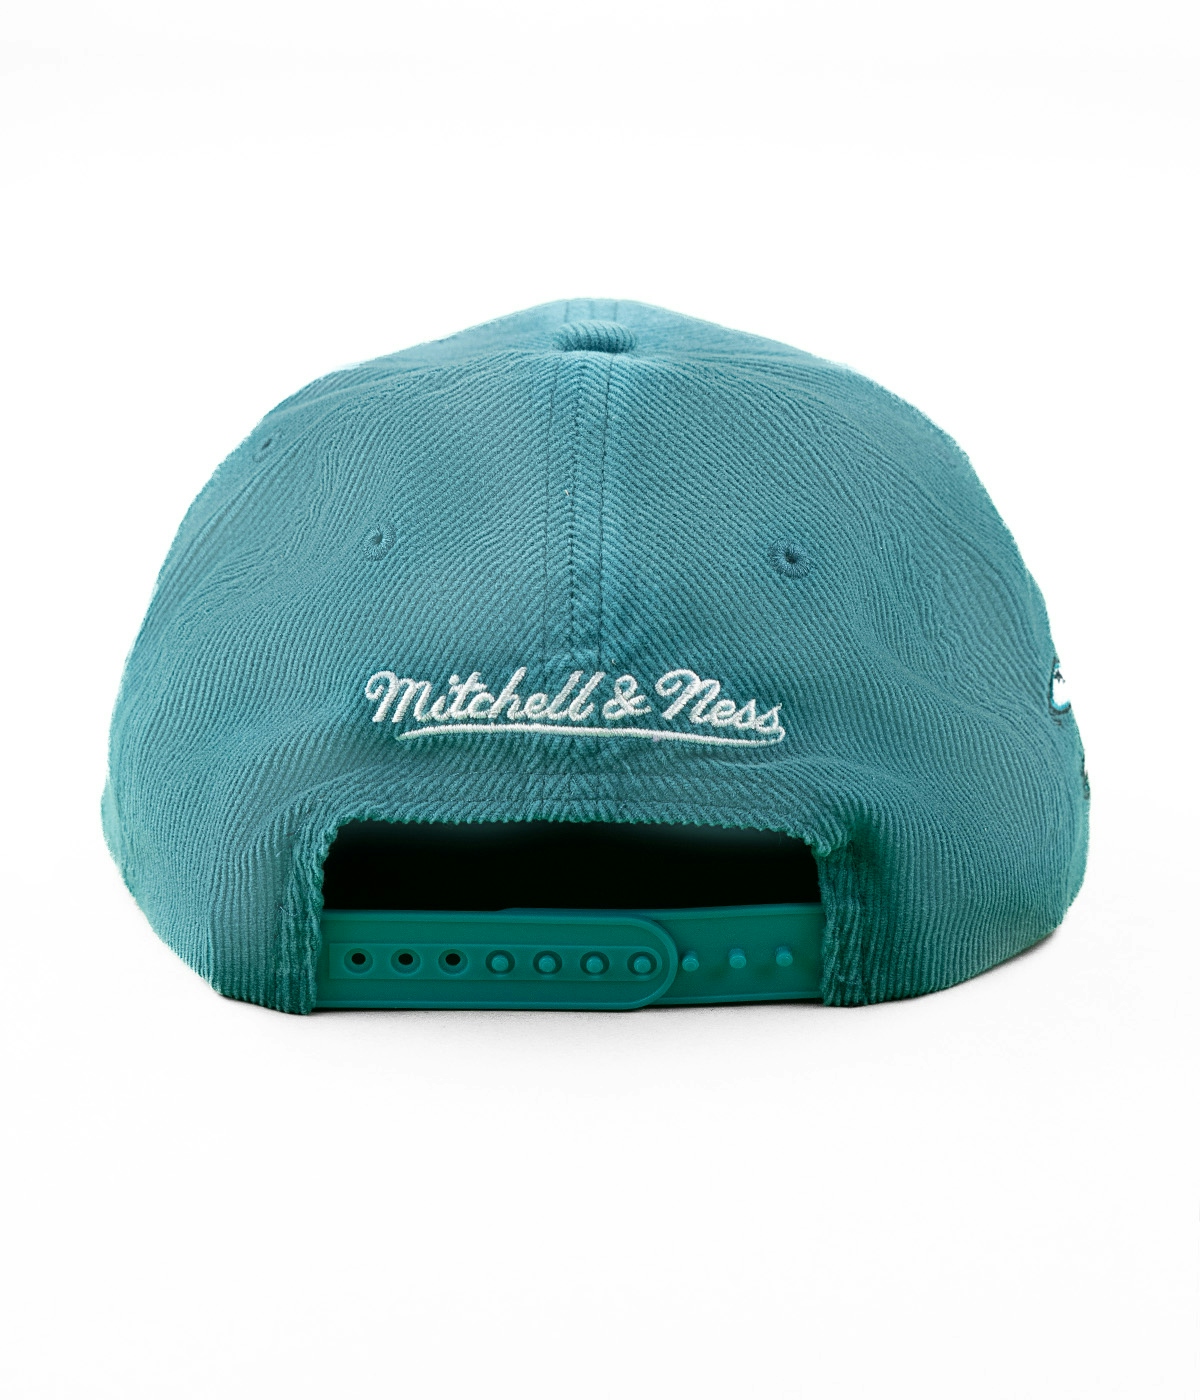 Mitchell & Ness Montage Cord Snapback - Charlotte Hornets Cap Teal 2